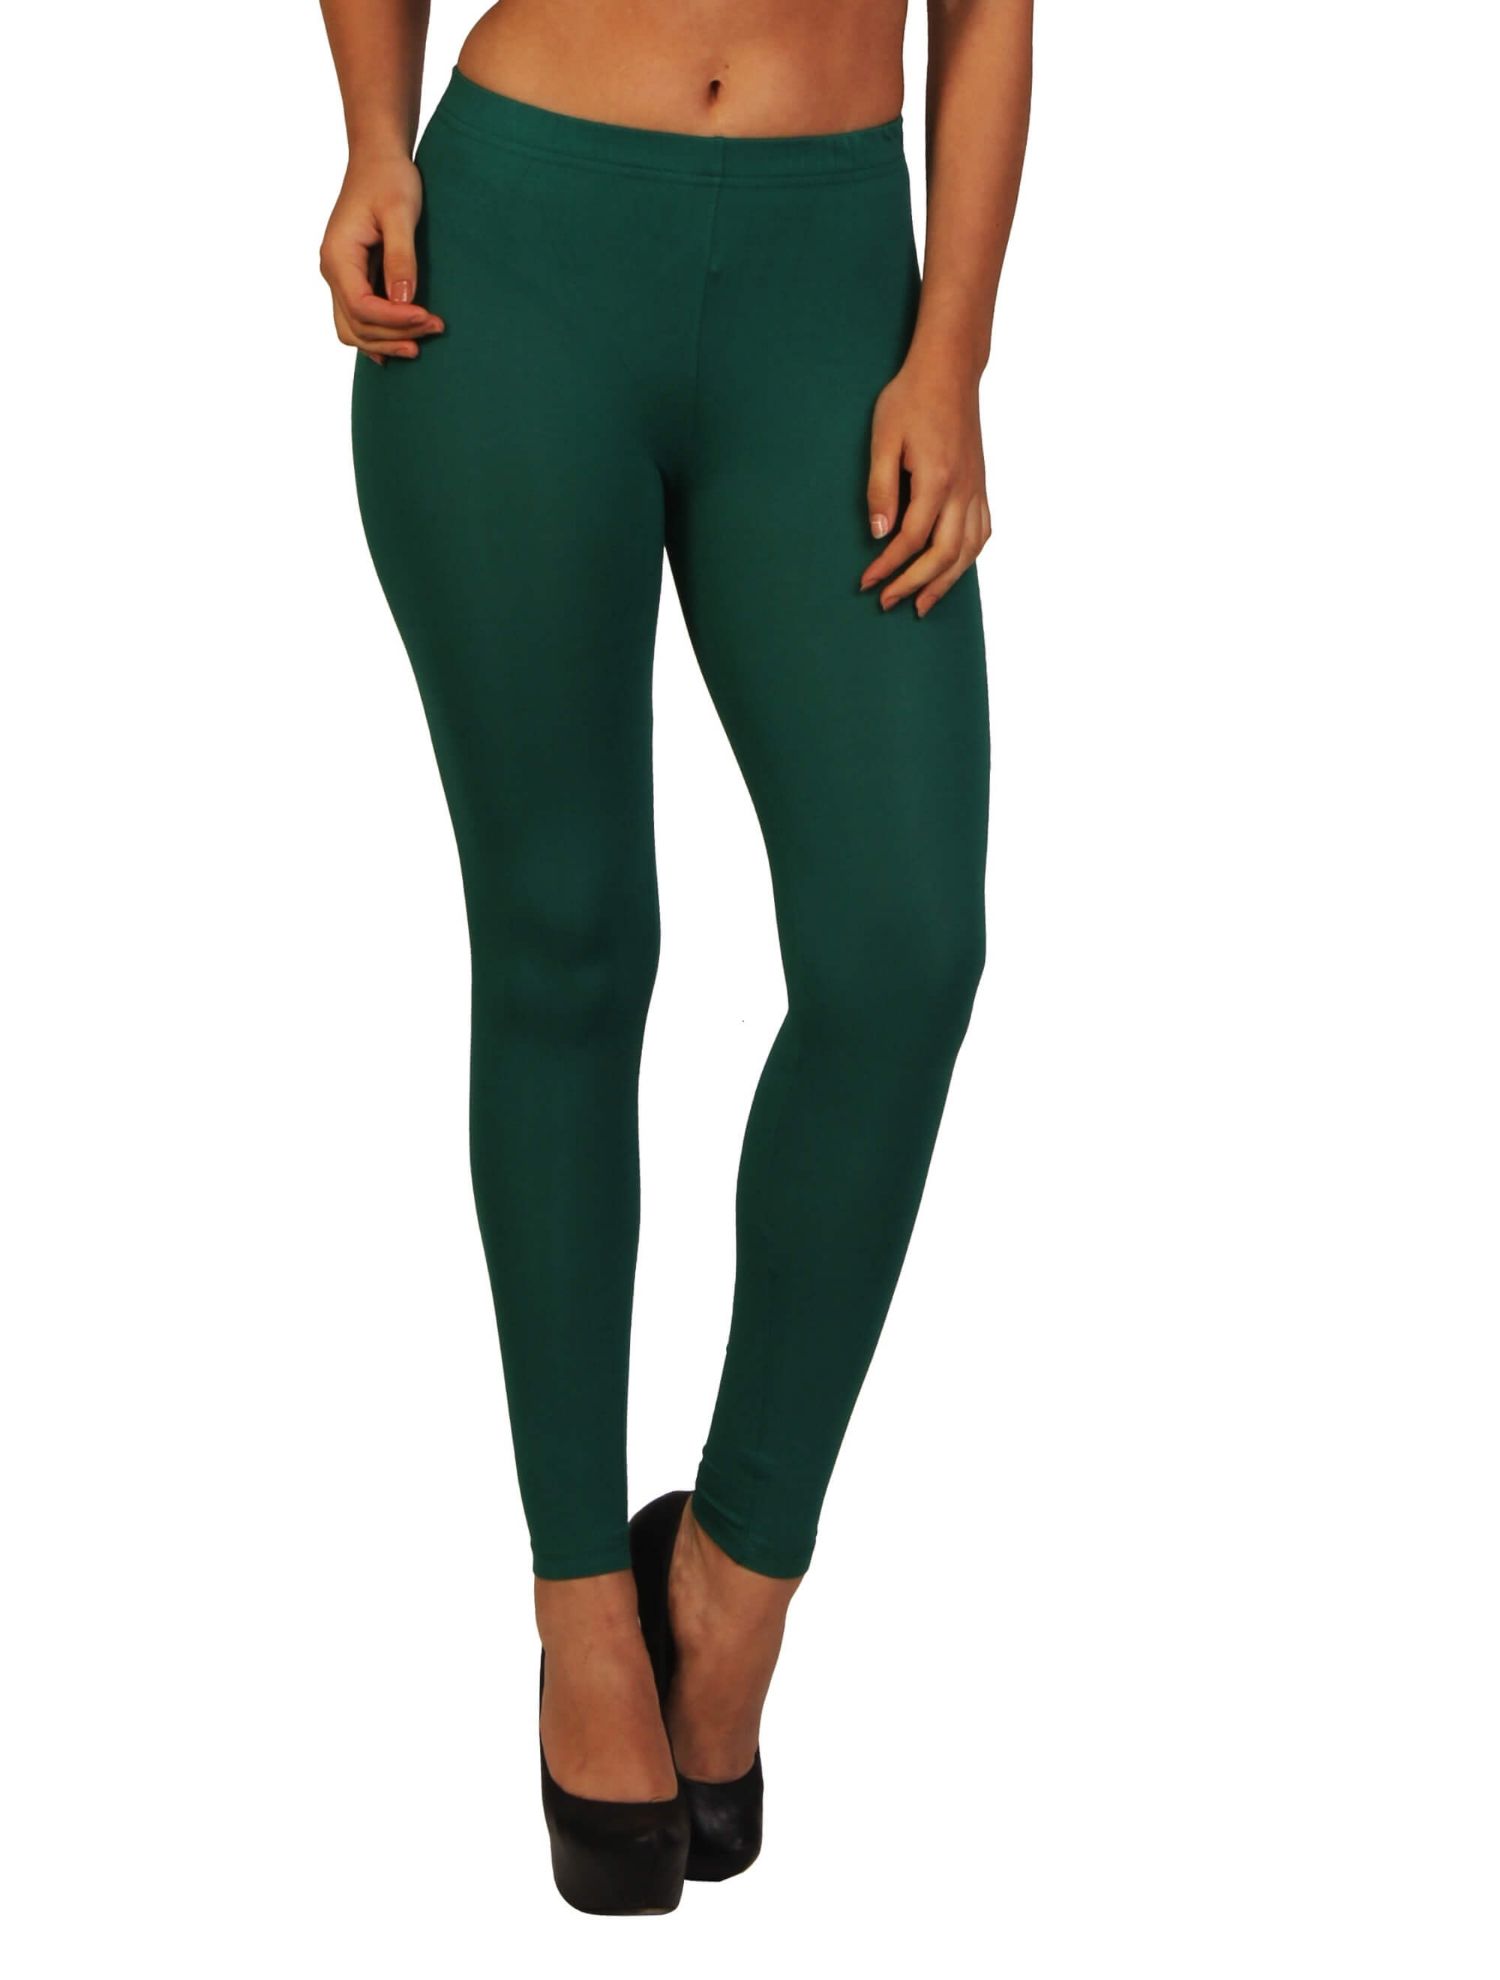 Frenchtrendz - Buy Cotton Spandex Ankle Leggings from Frenchtrendz. Go  visit our site.  purple-ankle-legging #clothing #clothingbrand #frenchtrendz  #frenchtrendzlovers #trending #capri #spandex